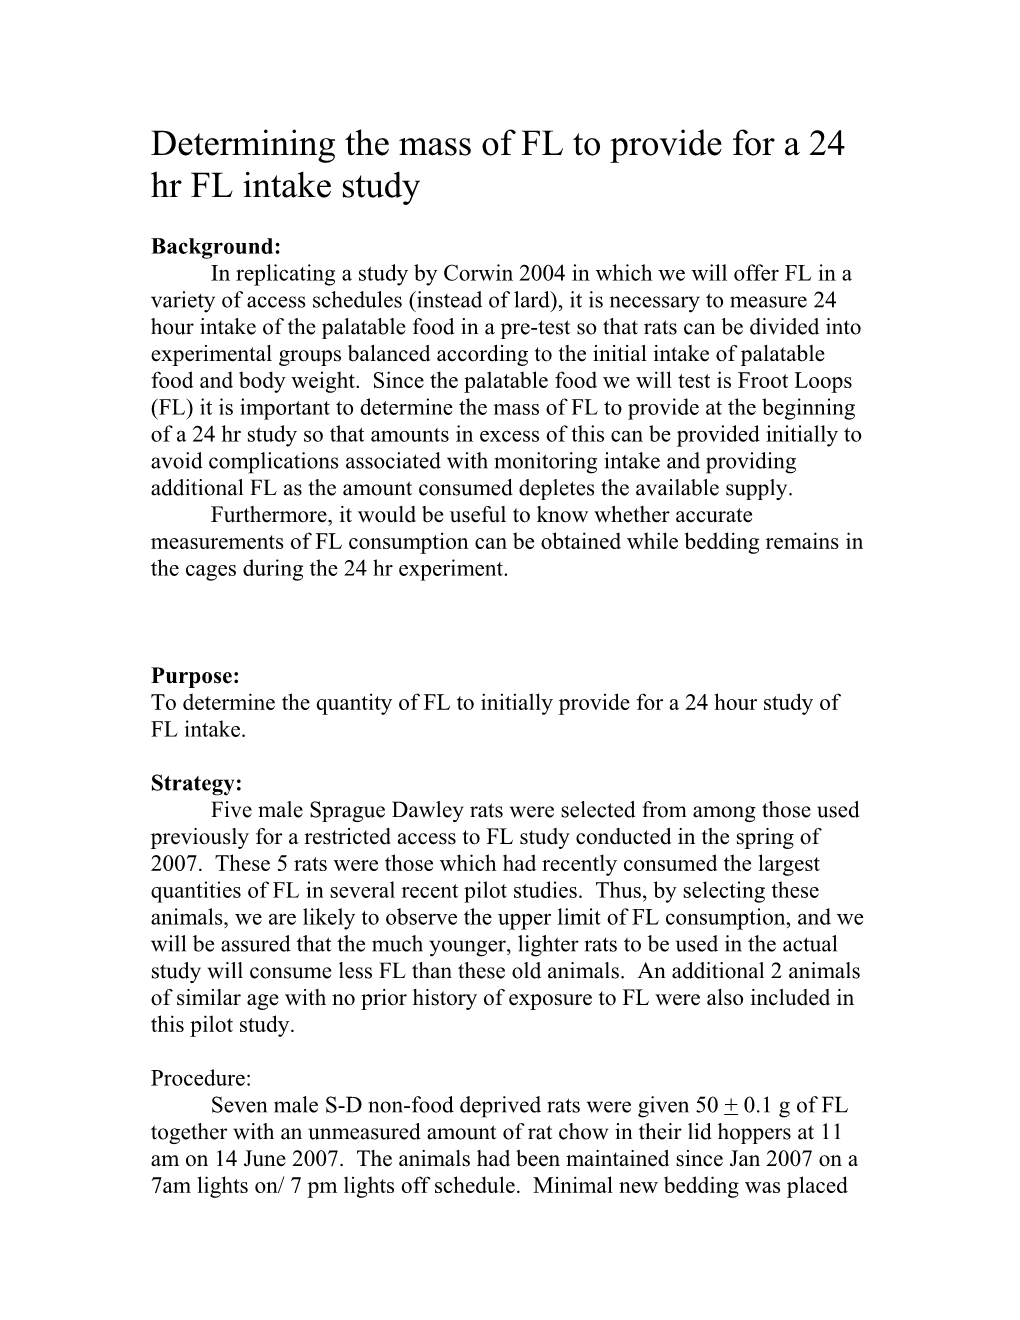 Determining the Mass of FL to Provide for a 24 Hr FL Intake Study